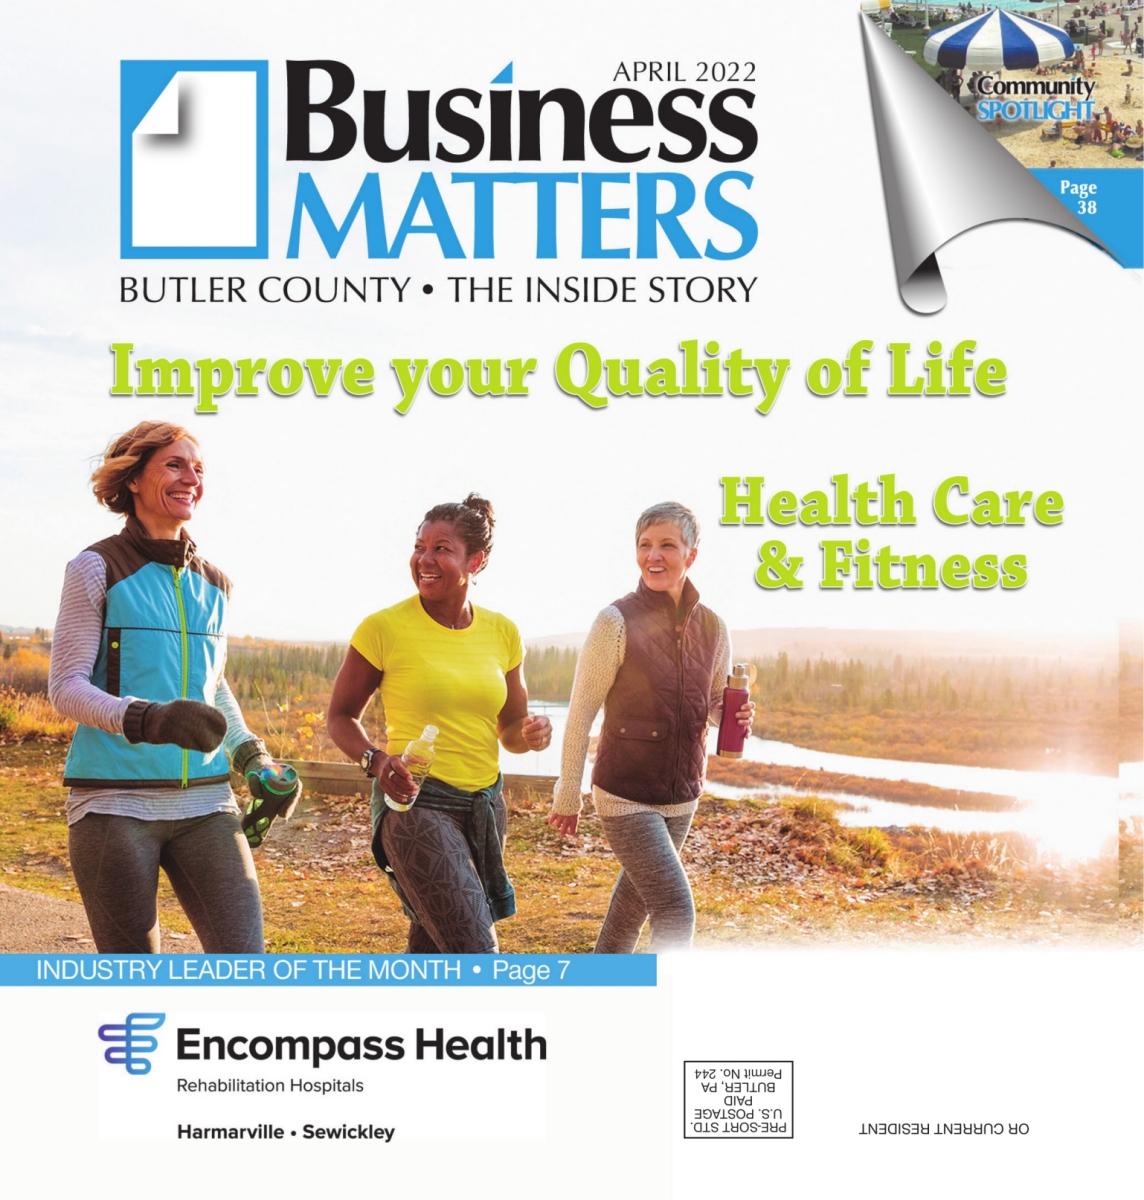 April 2022 - Improve your Quality of Life - Health Care & Fitness